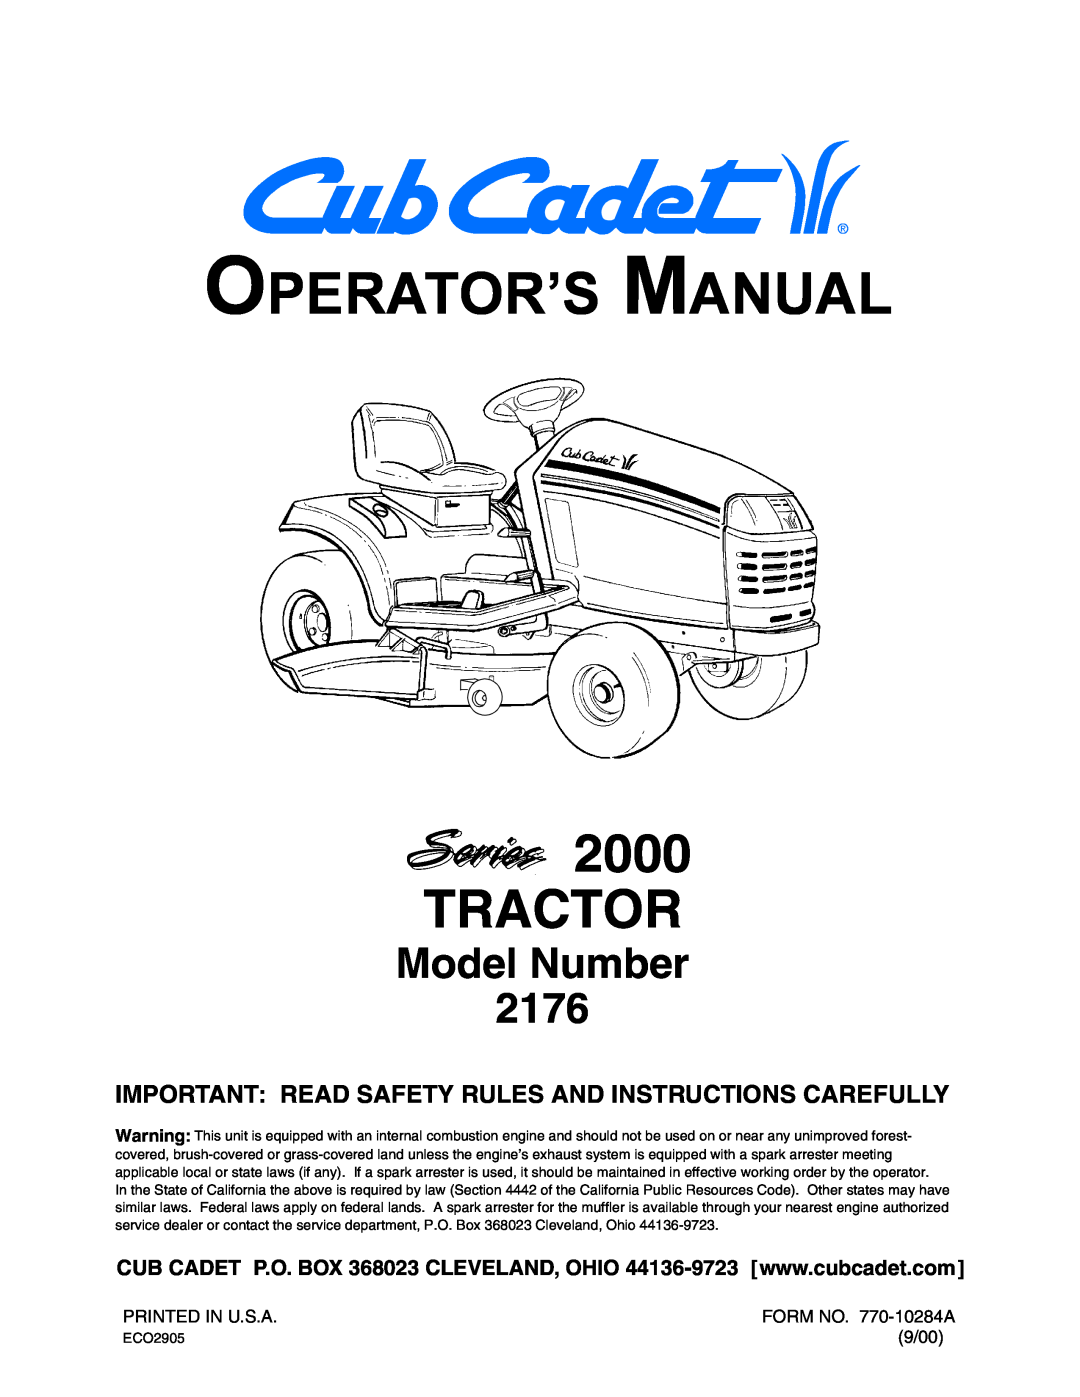 Cub Cadet 2176 manual Important Read Safety Rules And Instructions Carefully, Operator’S Manual, Tractor, Model Number 